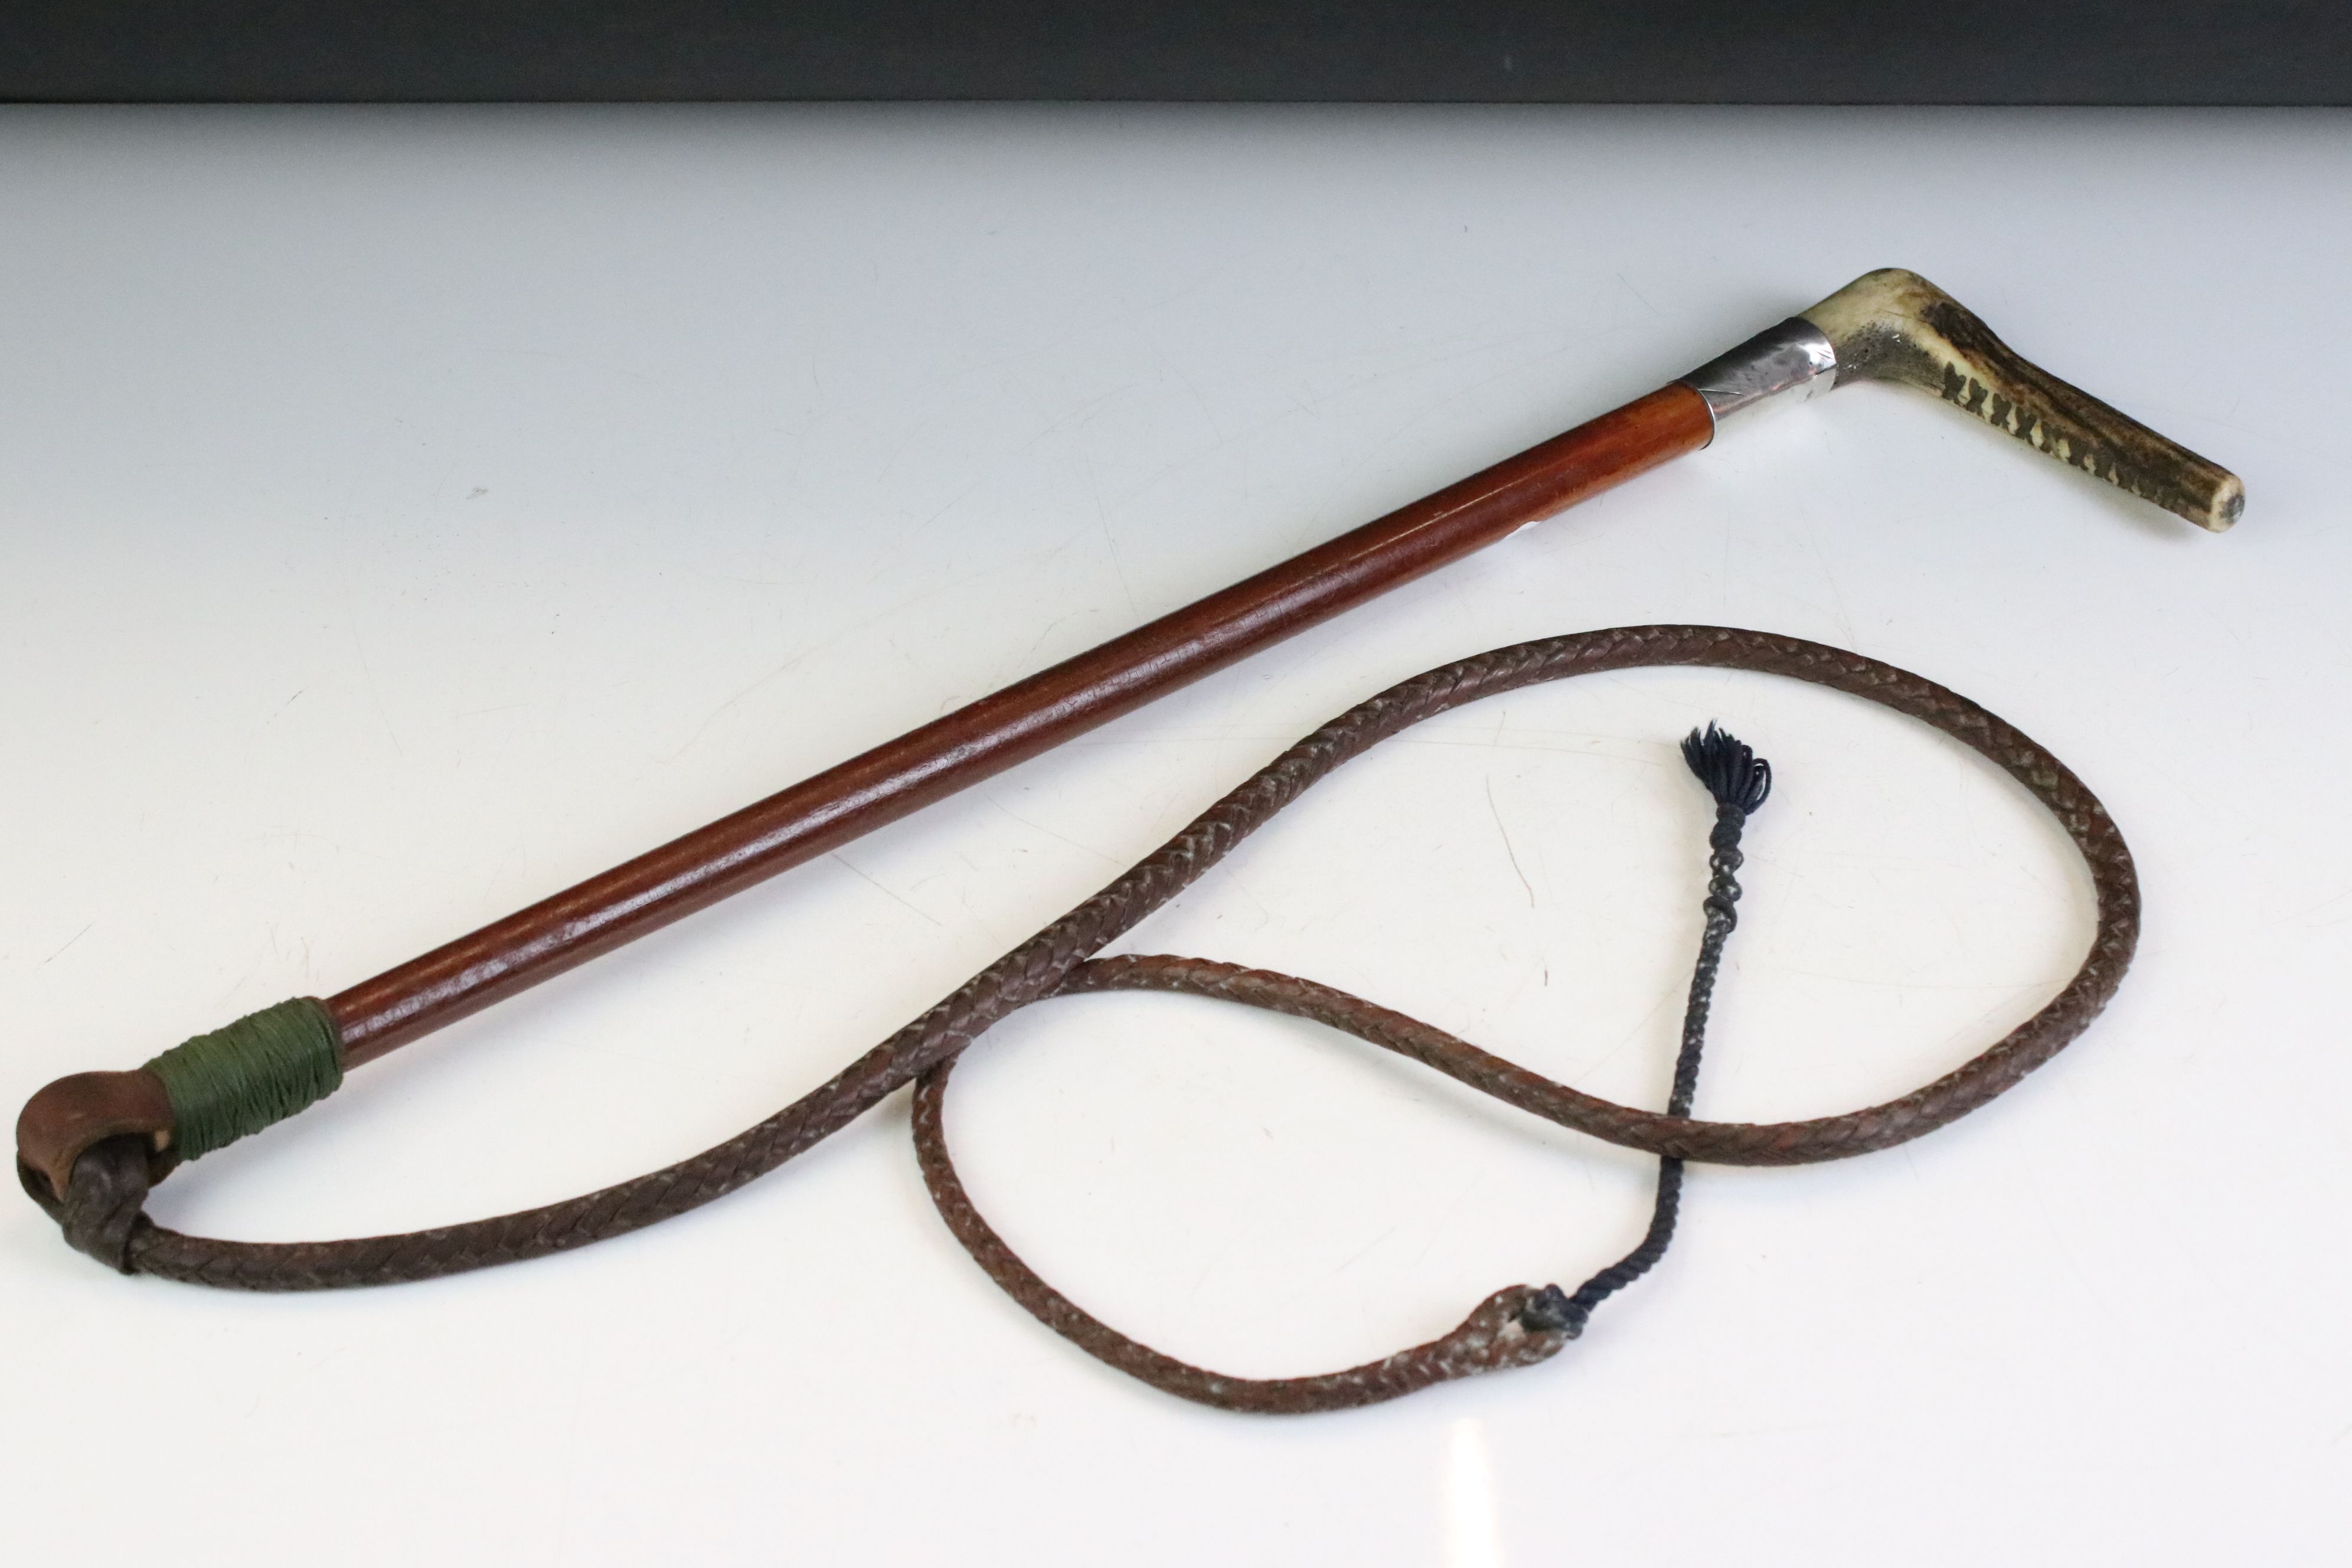 Early 20th century Hunting Whip with antler handle, silver band (Birmingham 1908) and plaited